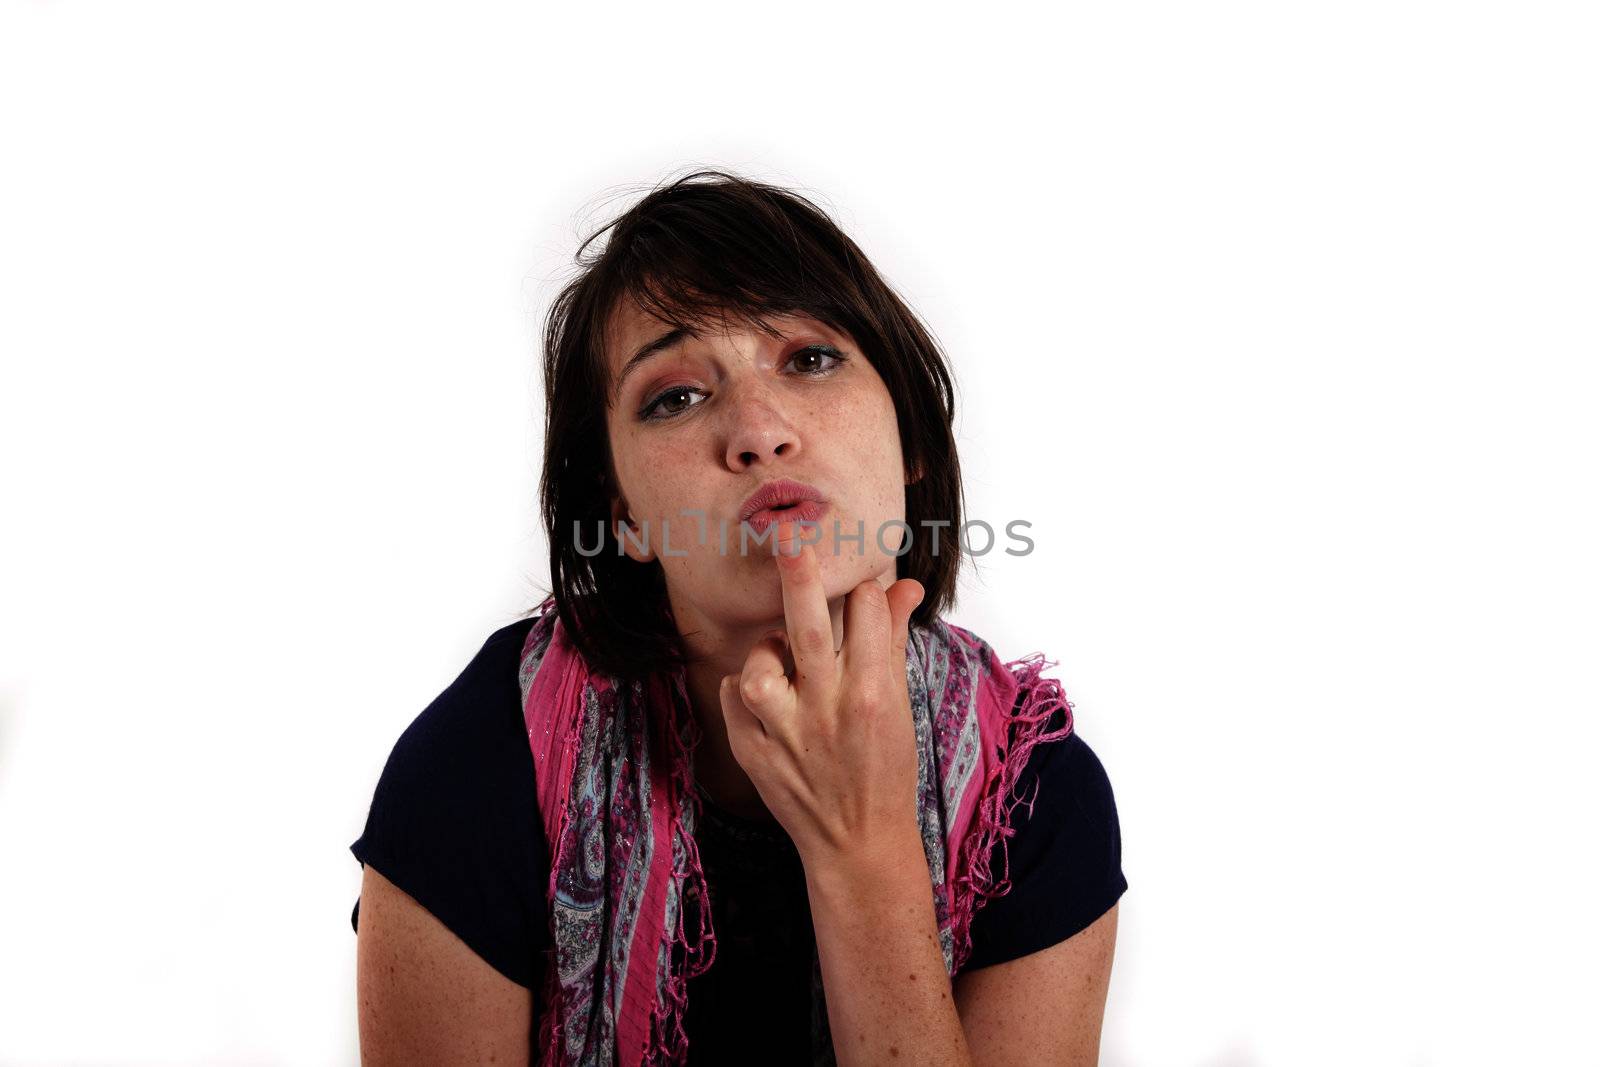 humourous portrait ogf a young woman with finger on her mouth by macintox